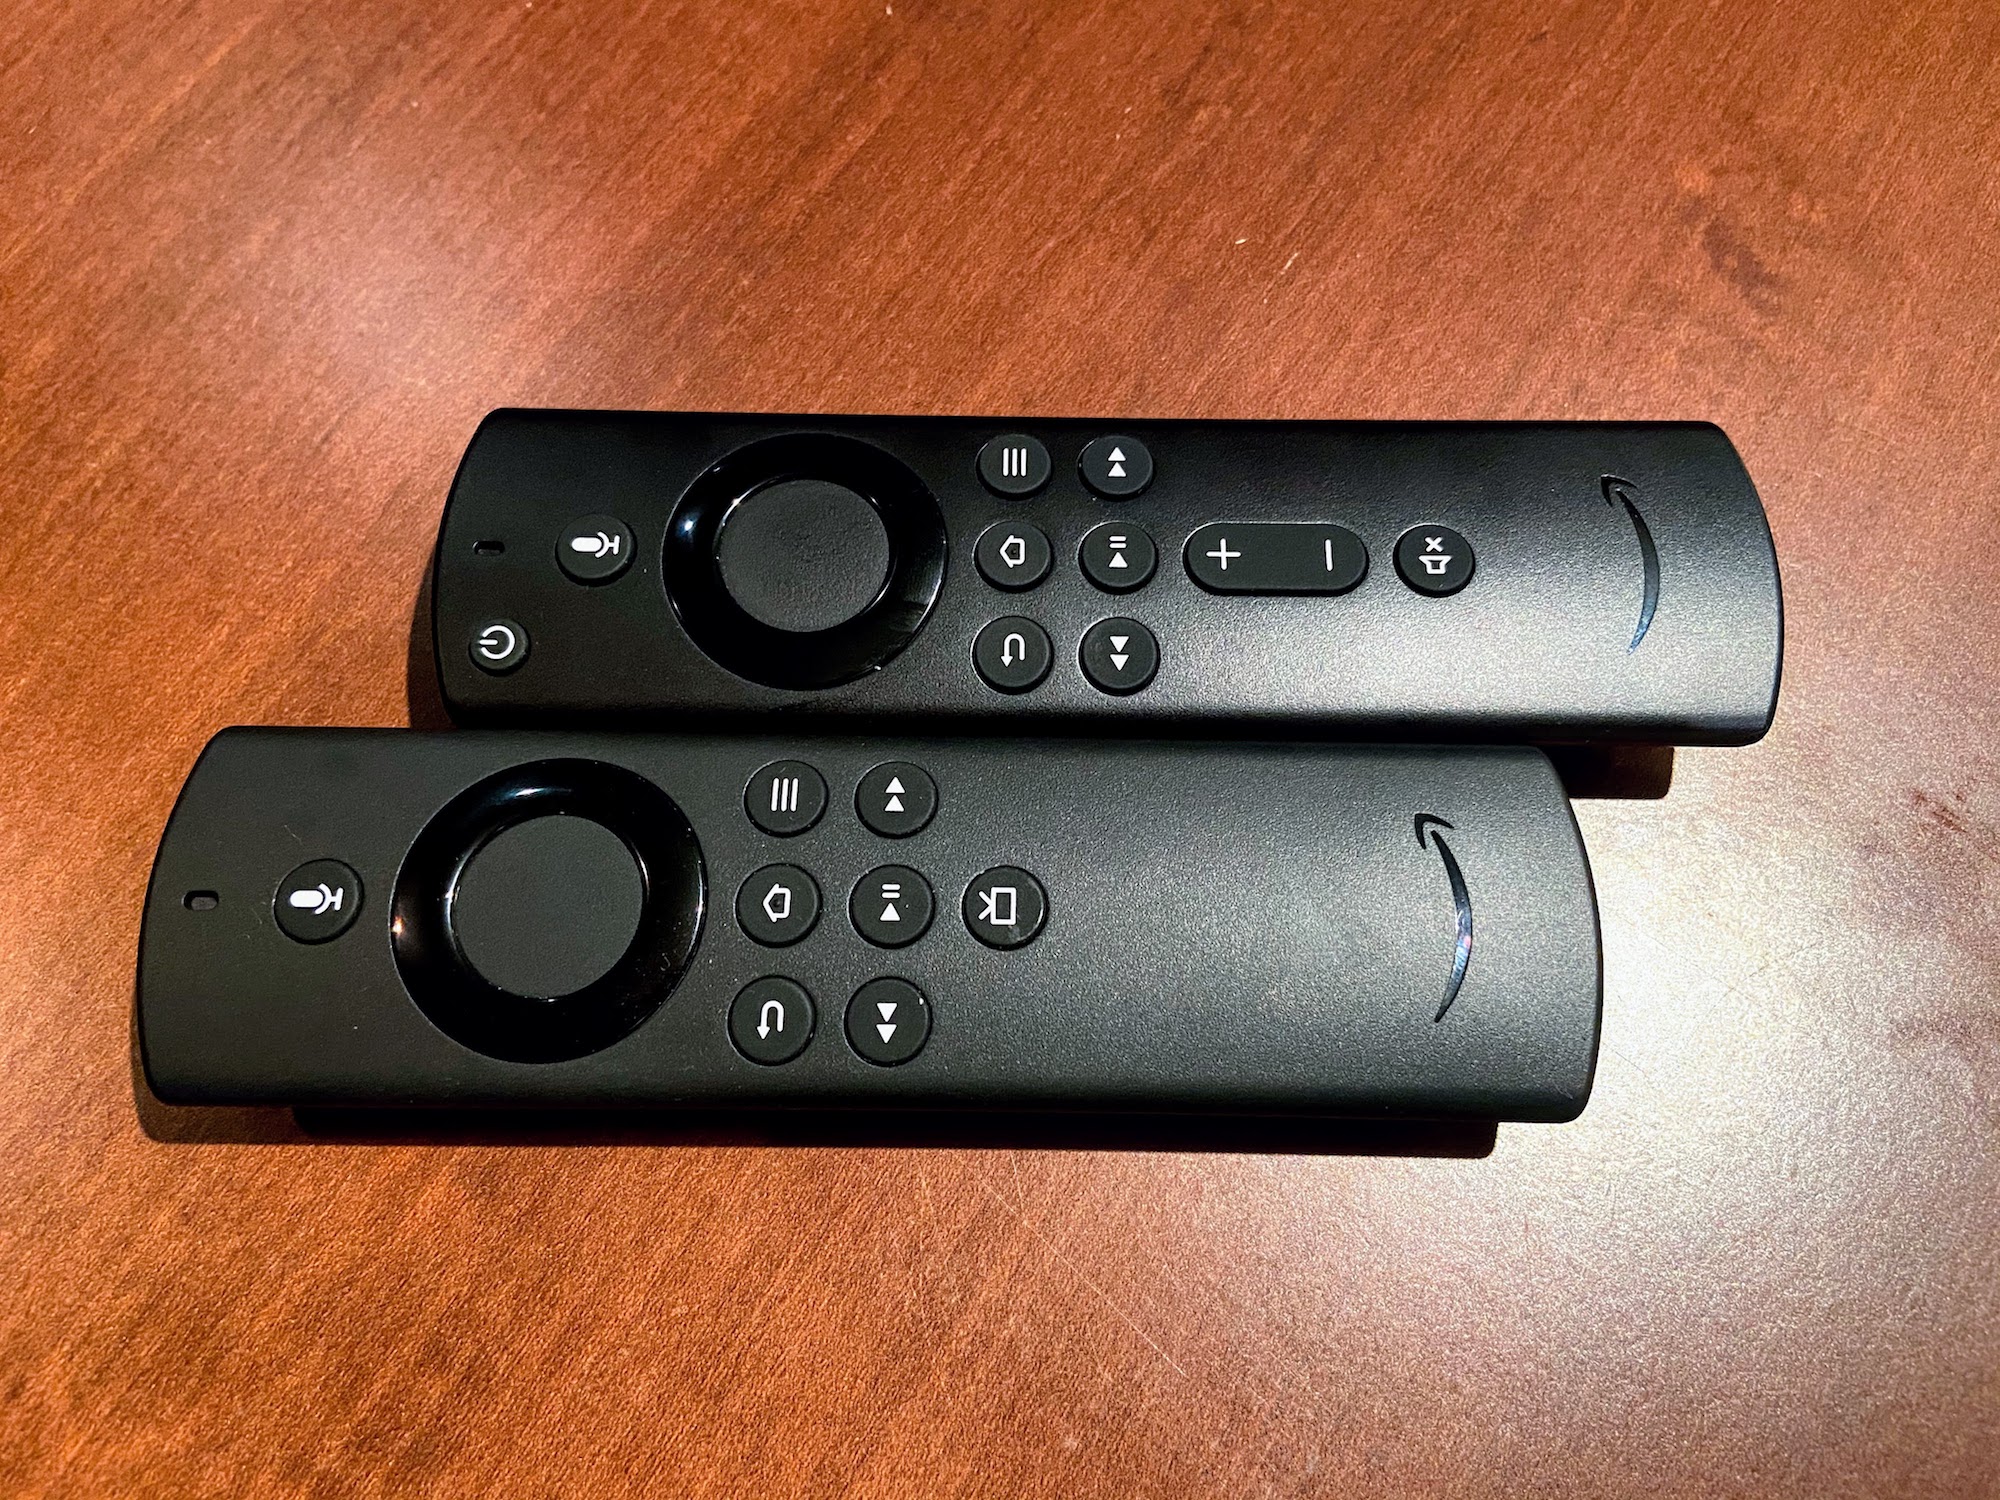 Fire TV Stick Lite vs Fire TV Stick: Which is right for you?